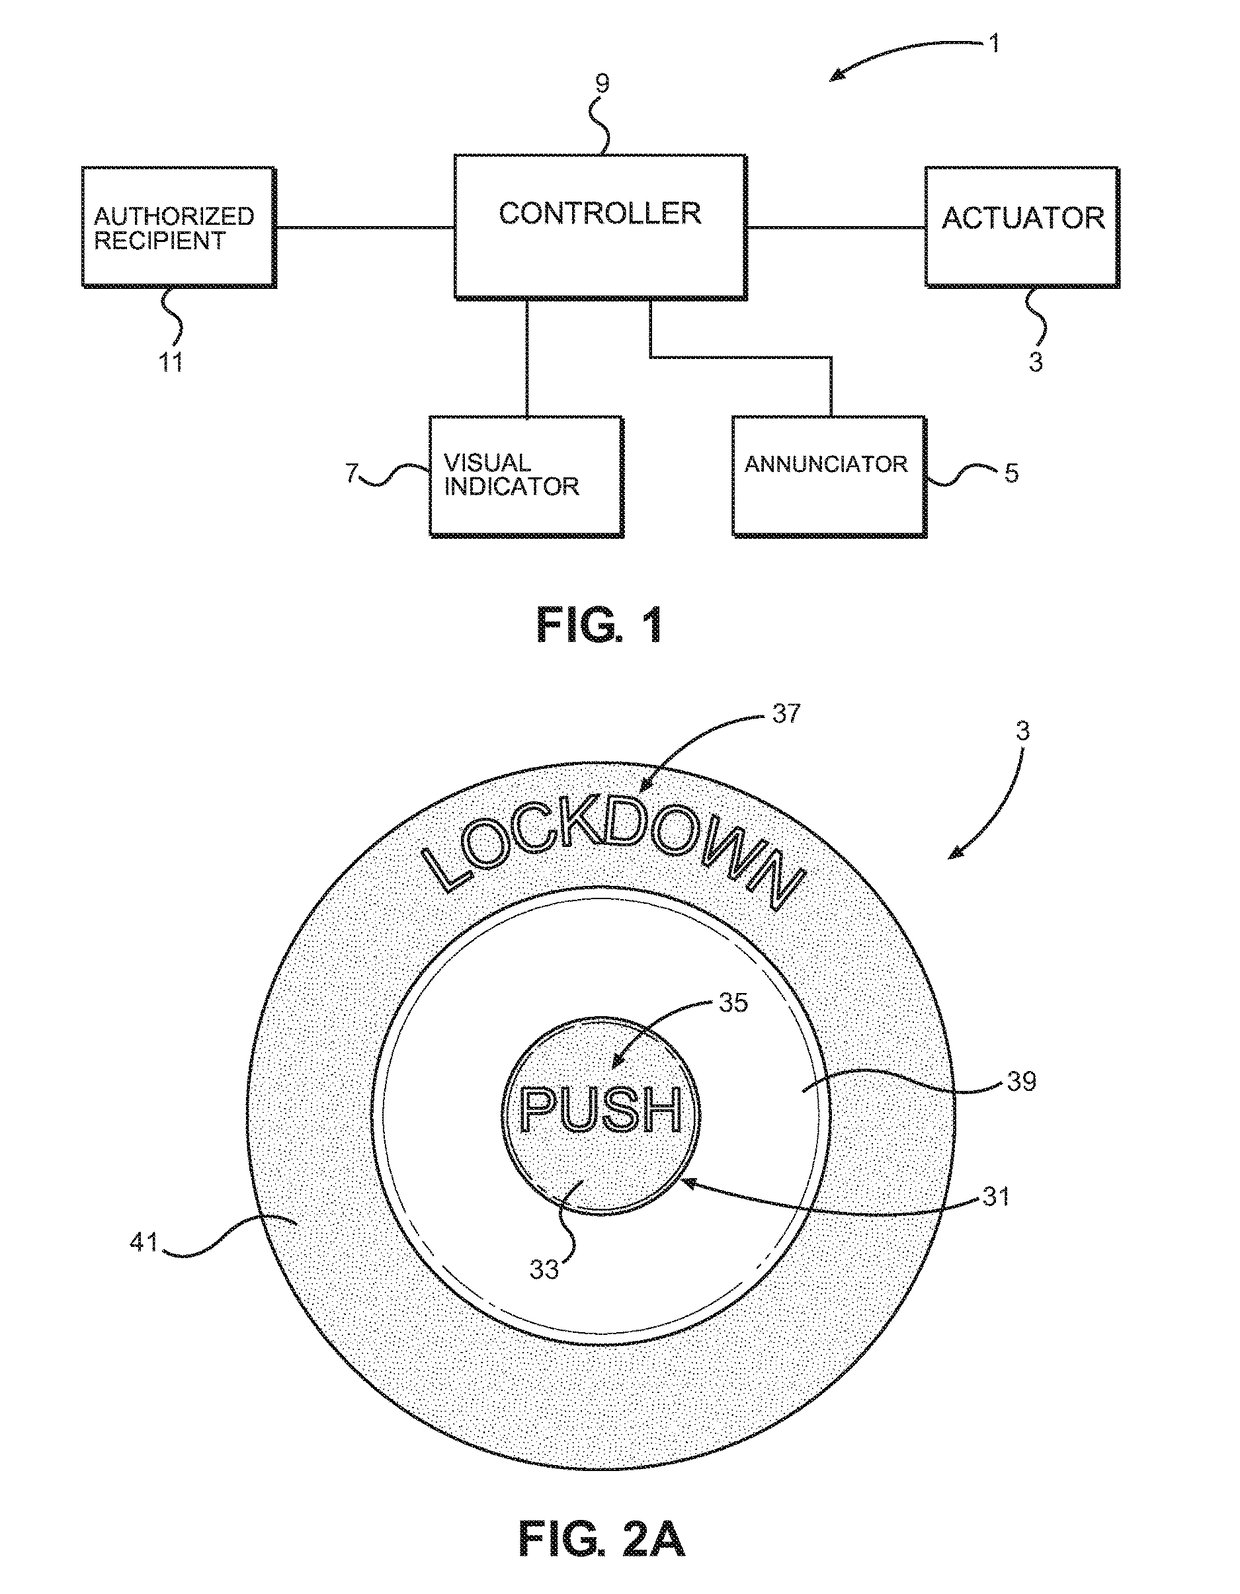 Lockdown apparatus for initiation of lockdown procedures at a facility during an emergency